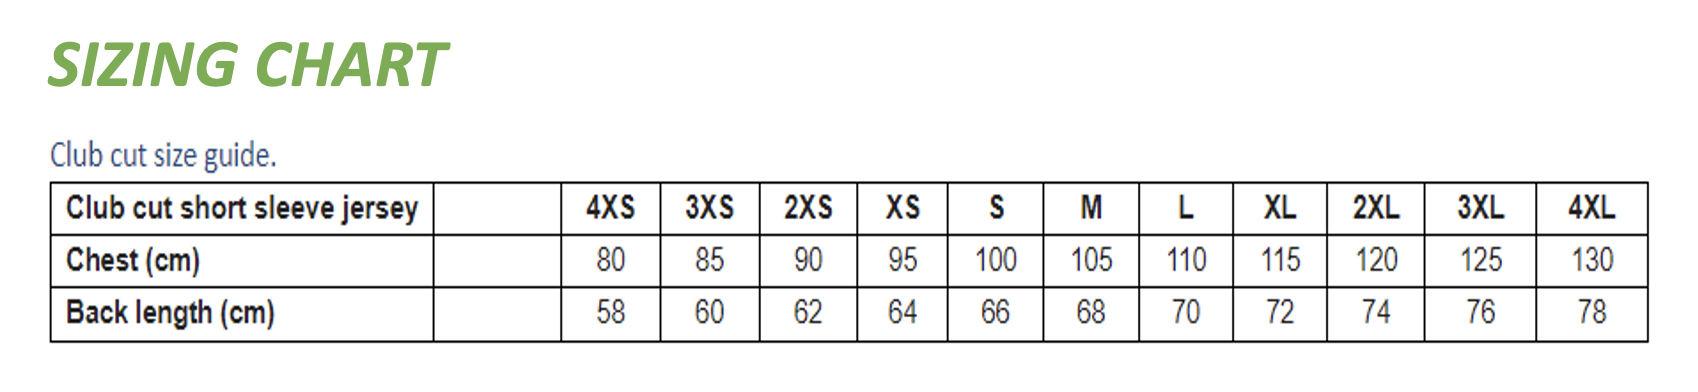 Table of clothing sizes